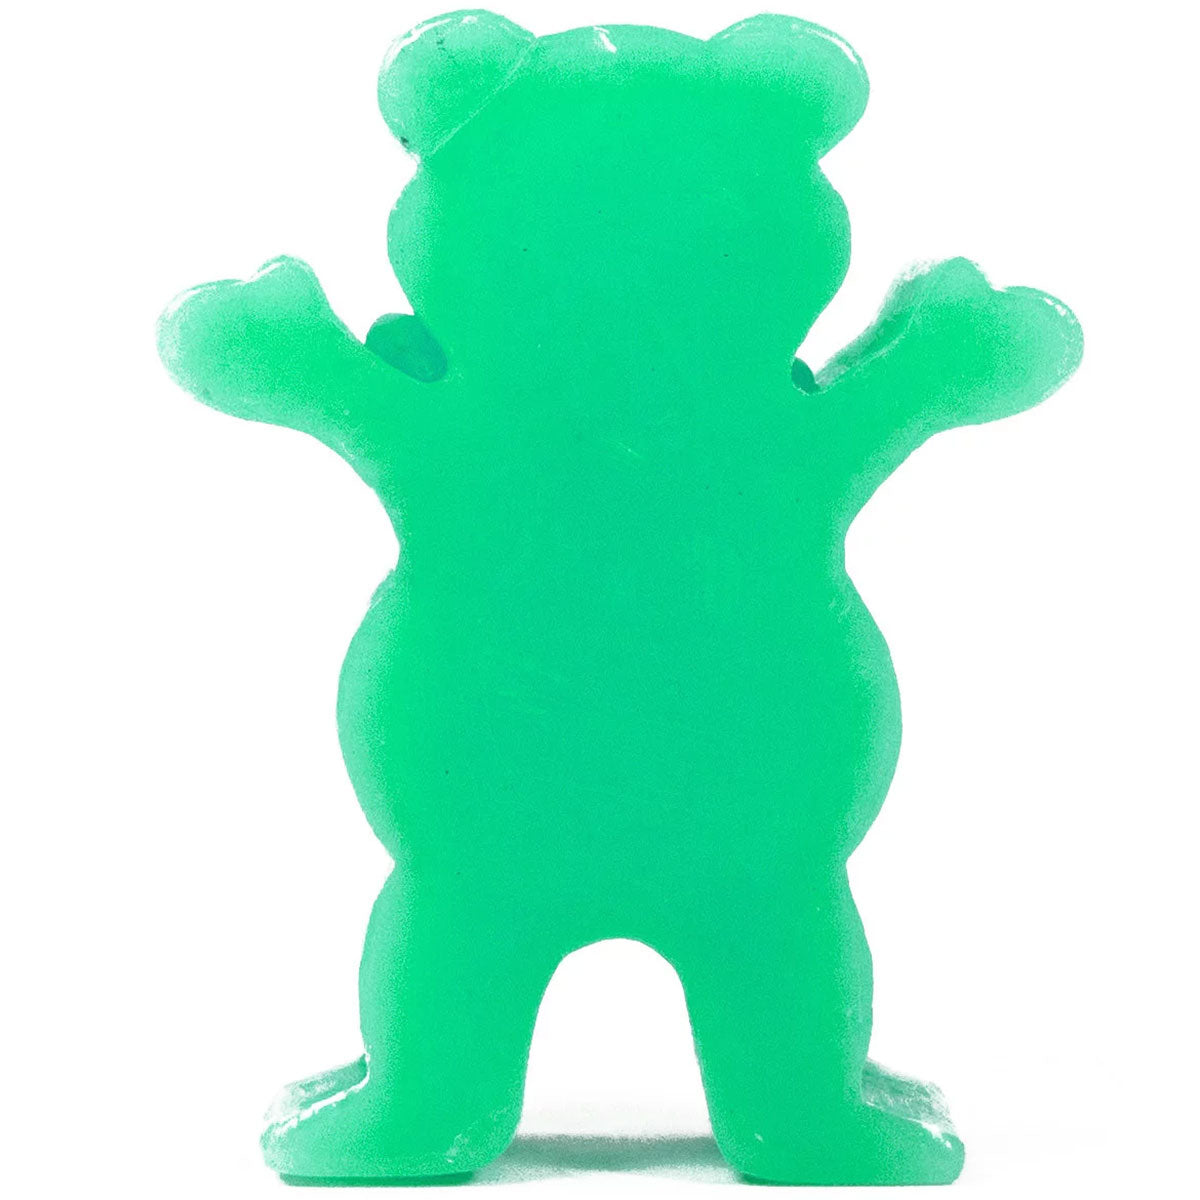 Grizzly Grease Skate Wax - Green image 1